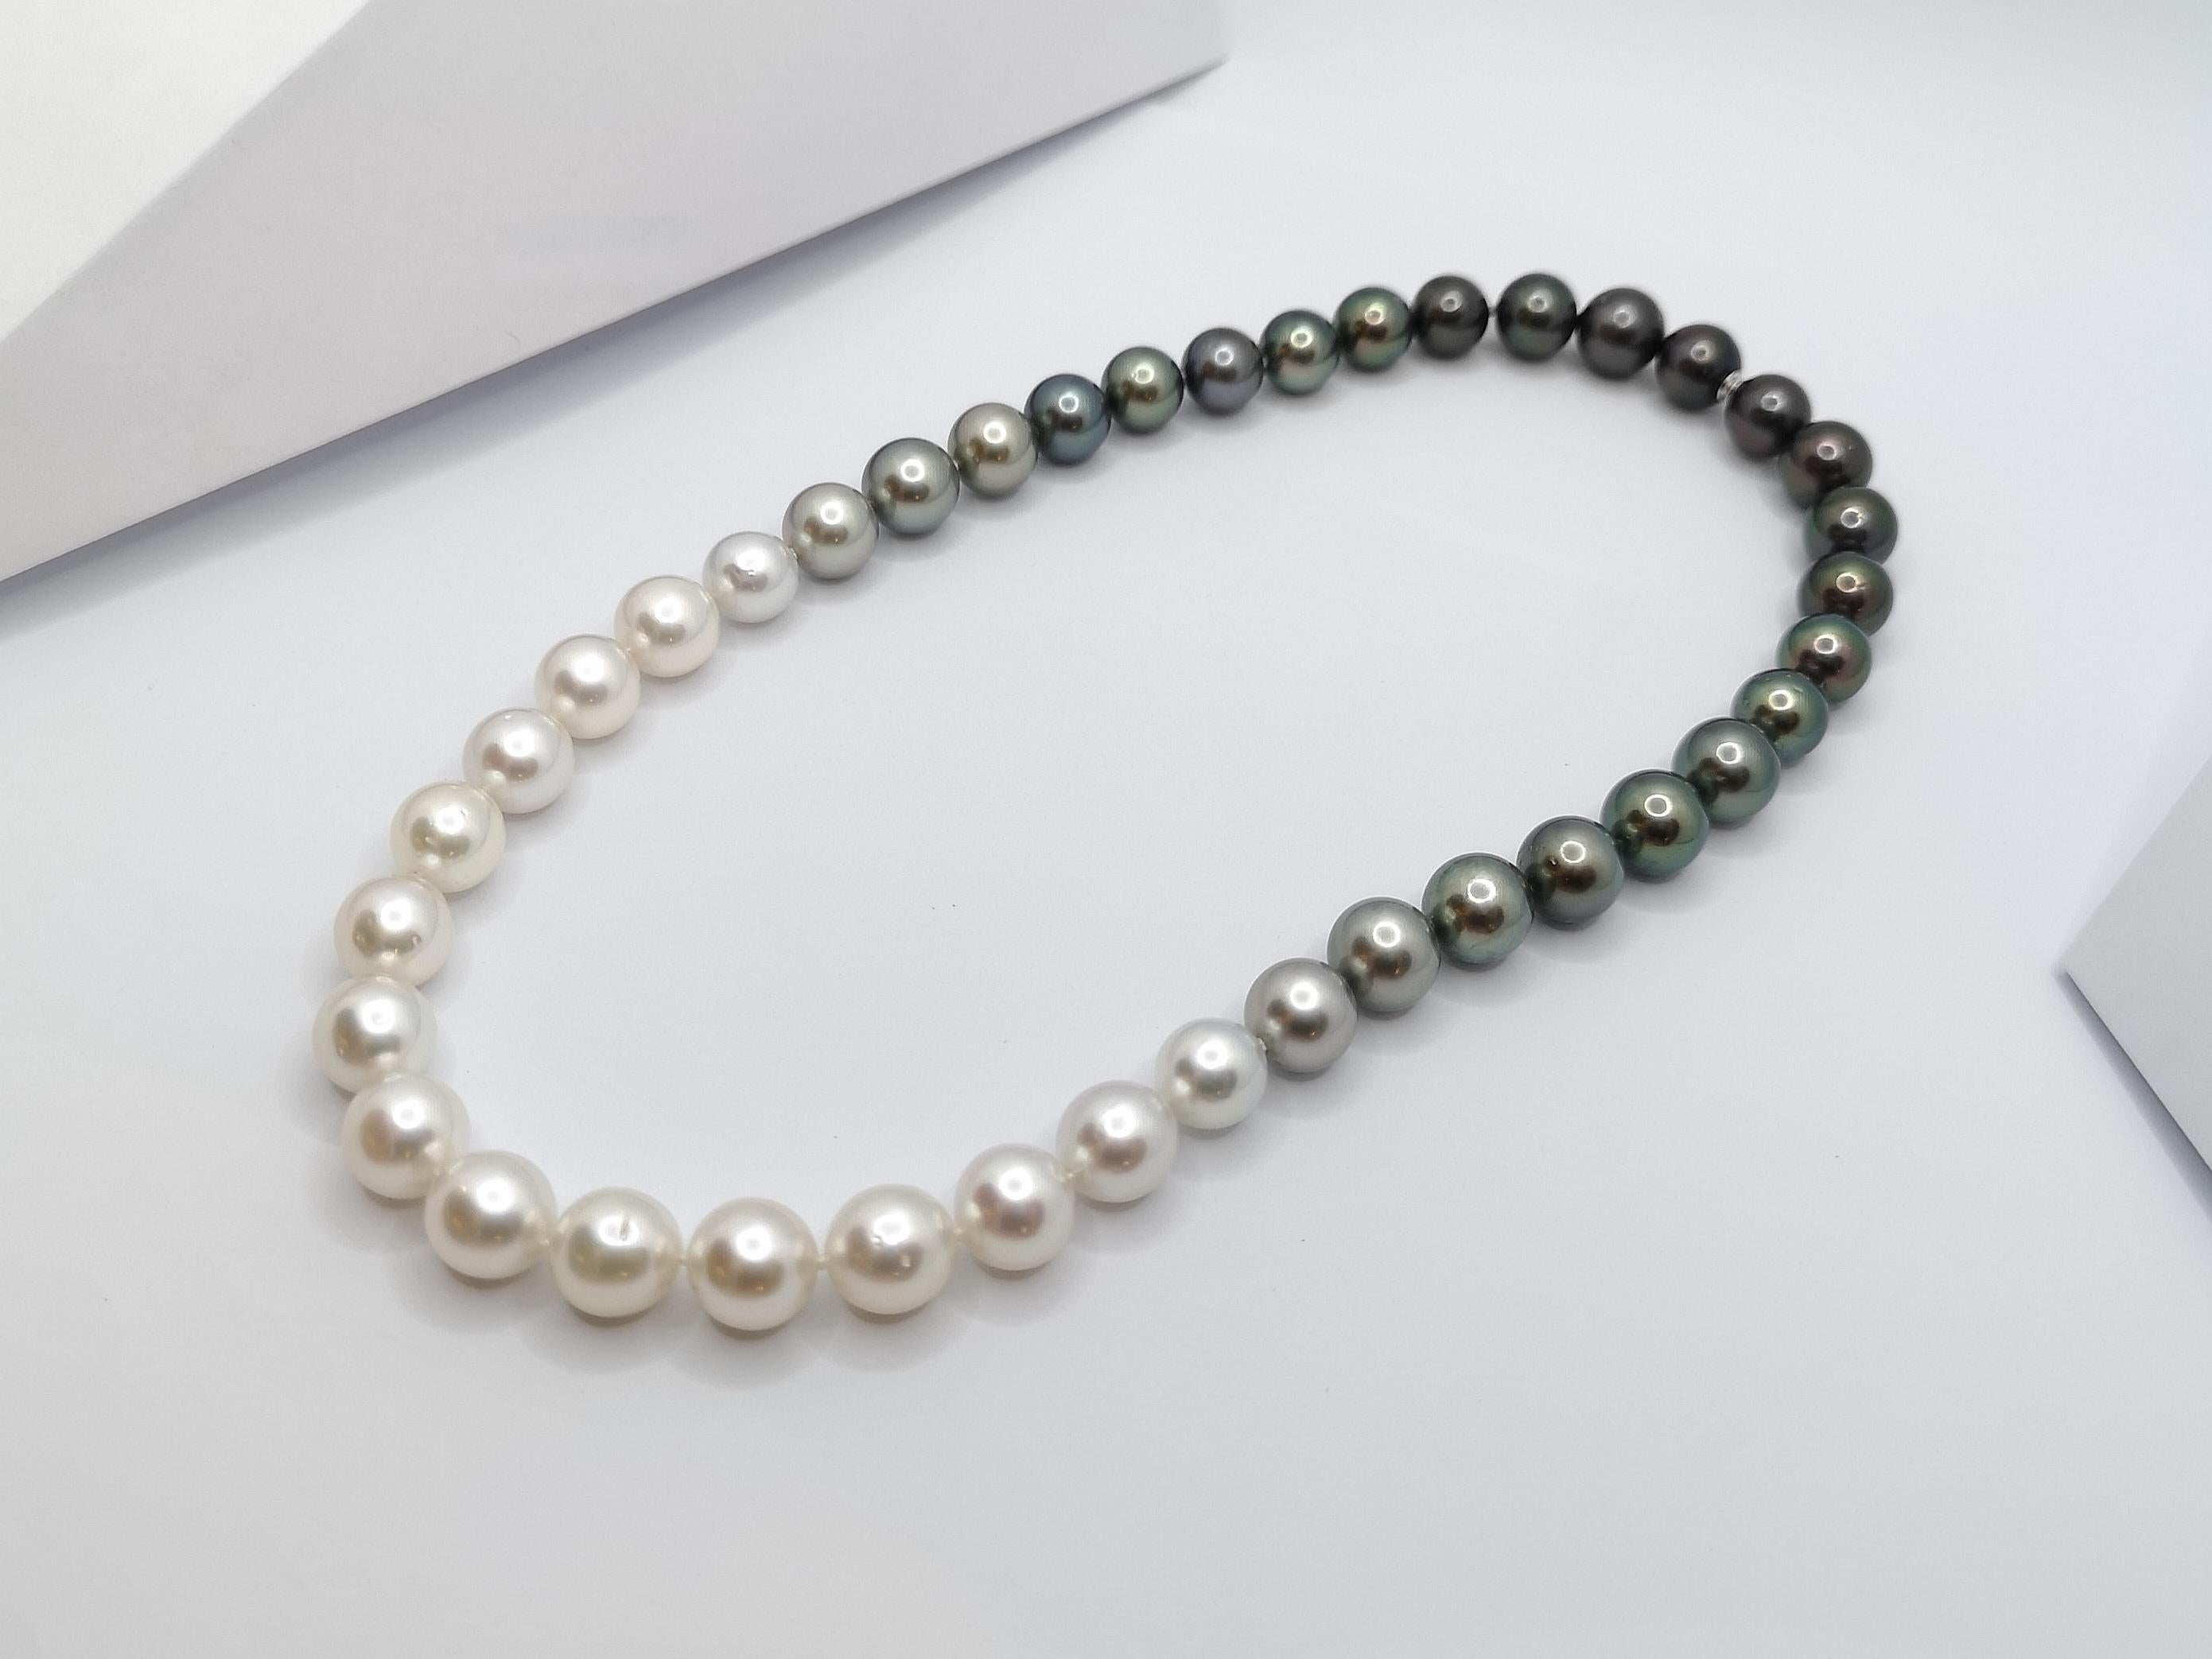 Gradutated Color South Sea Pearl Necklace with Hidden 18K White Gold Clasp For Sale 5